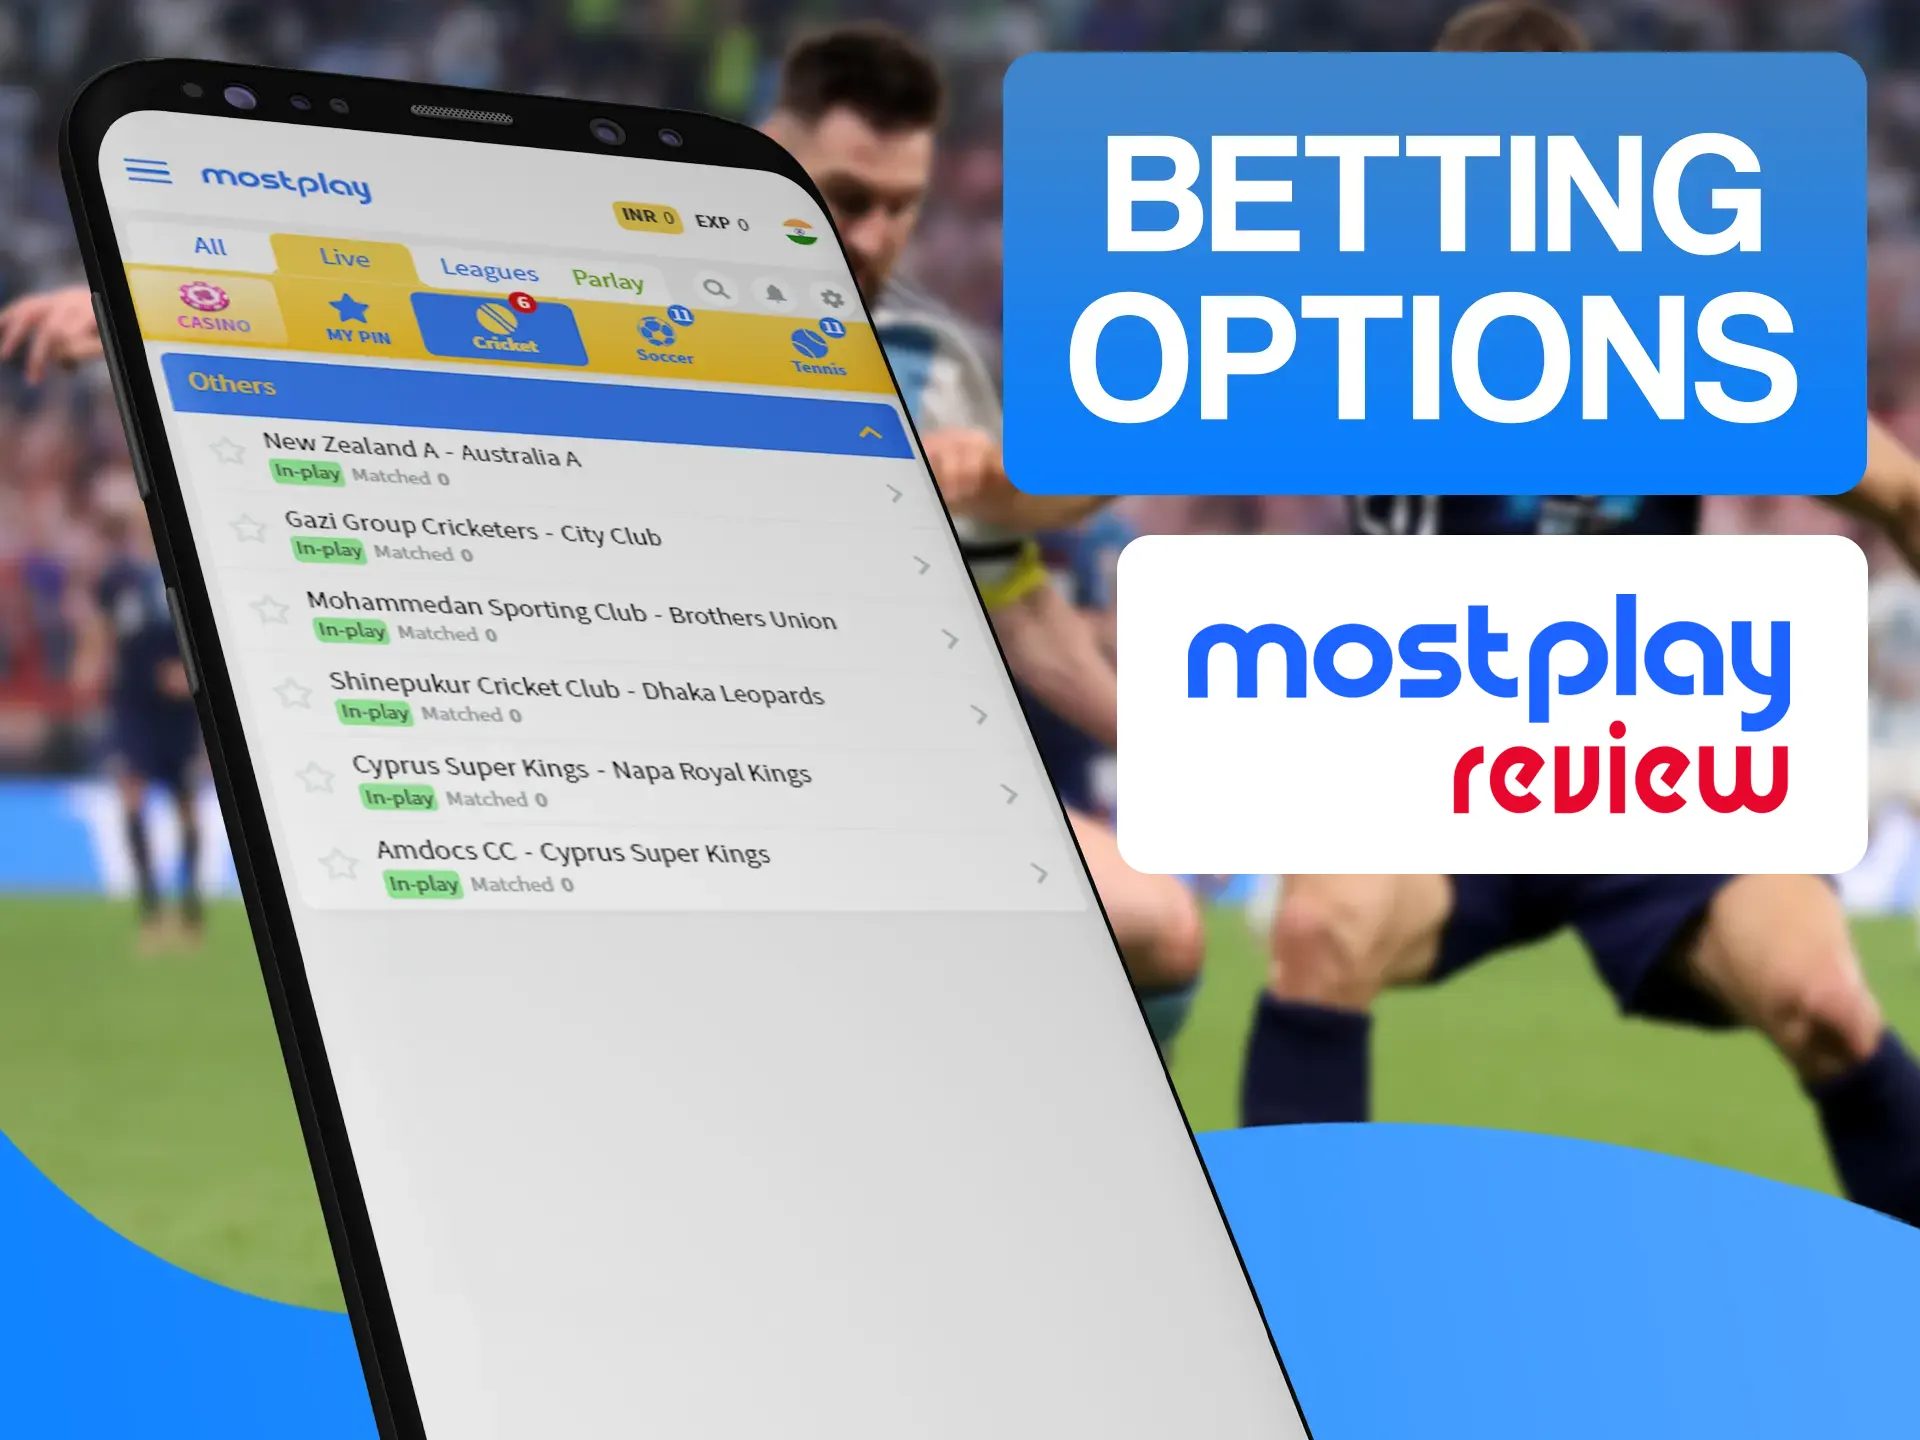 Create your own bet on the main page of the Mostplay website.